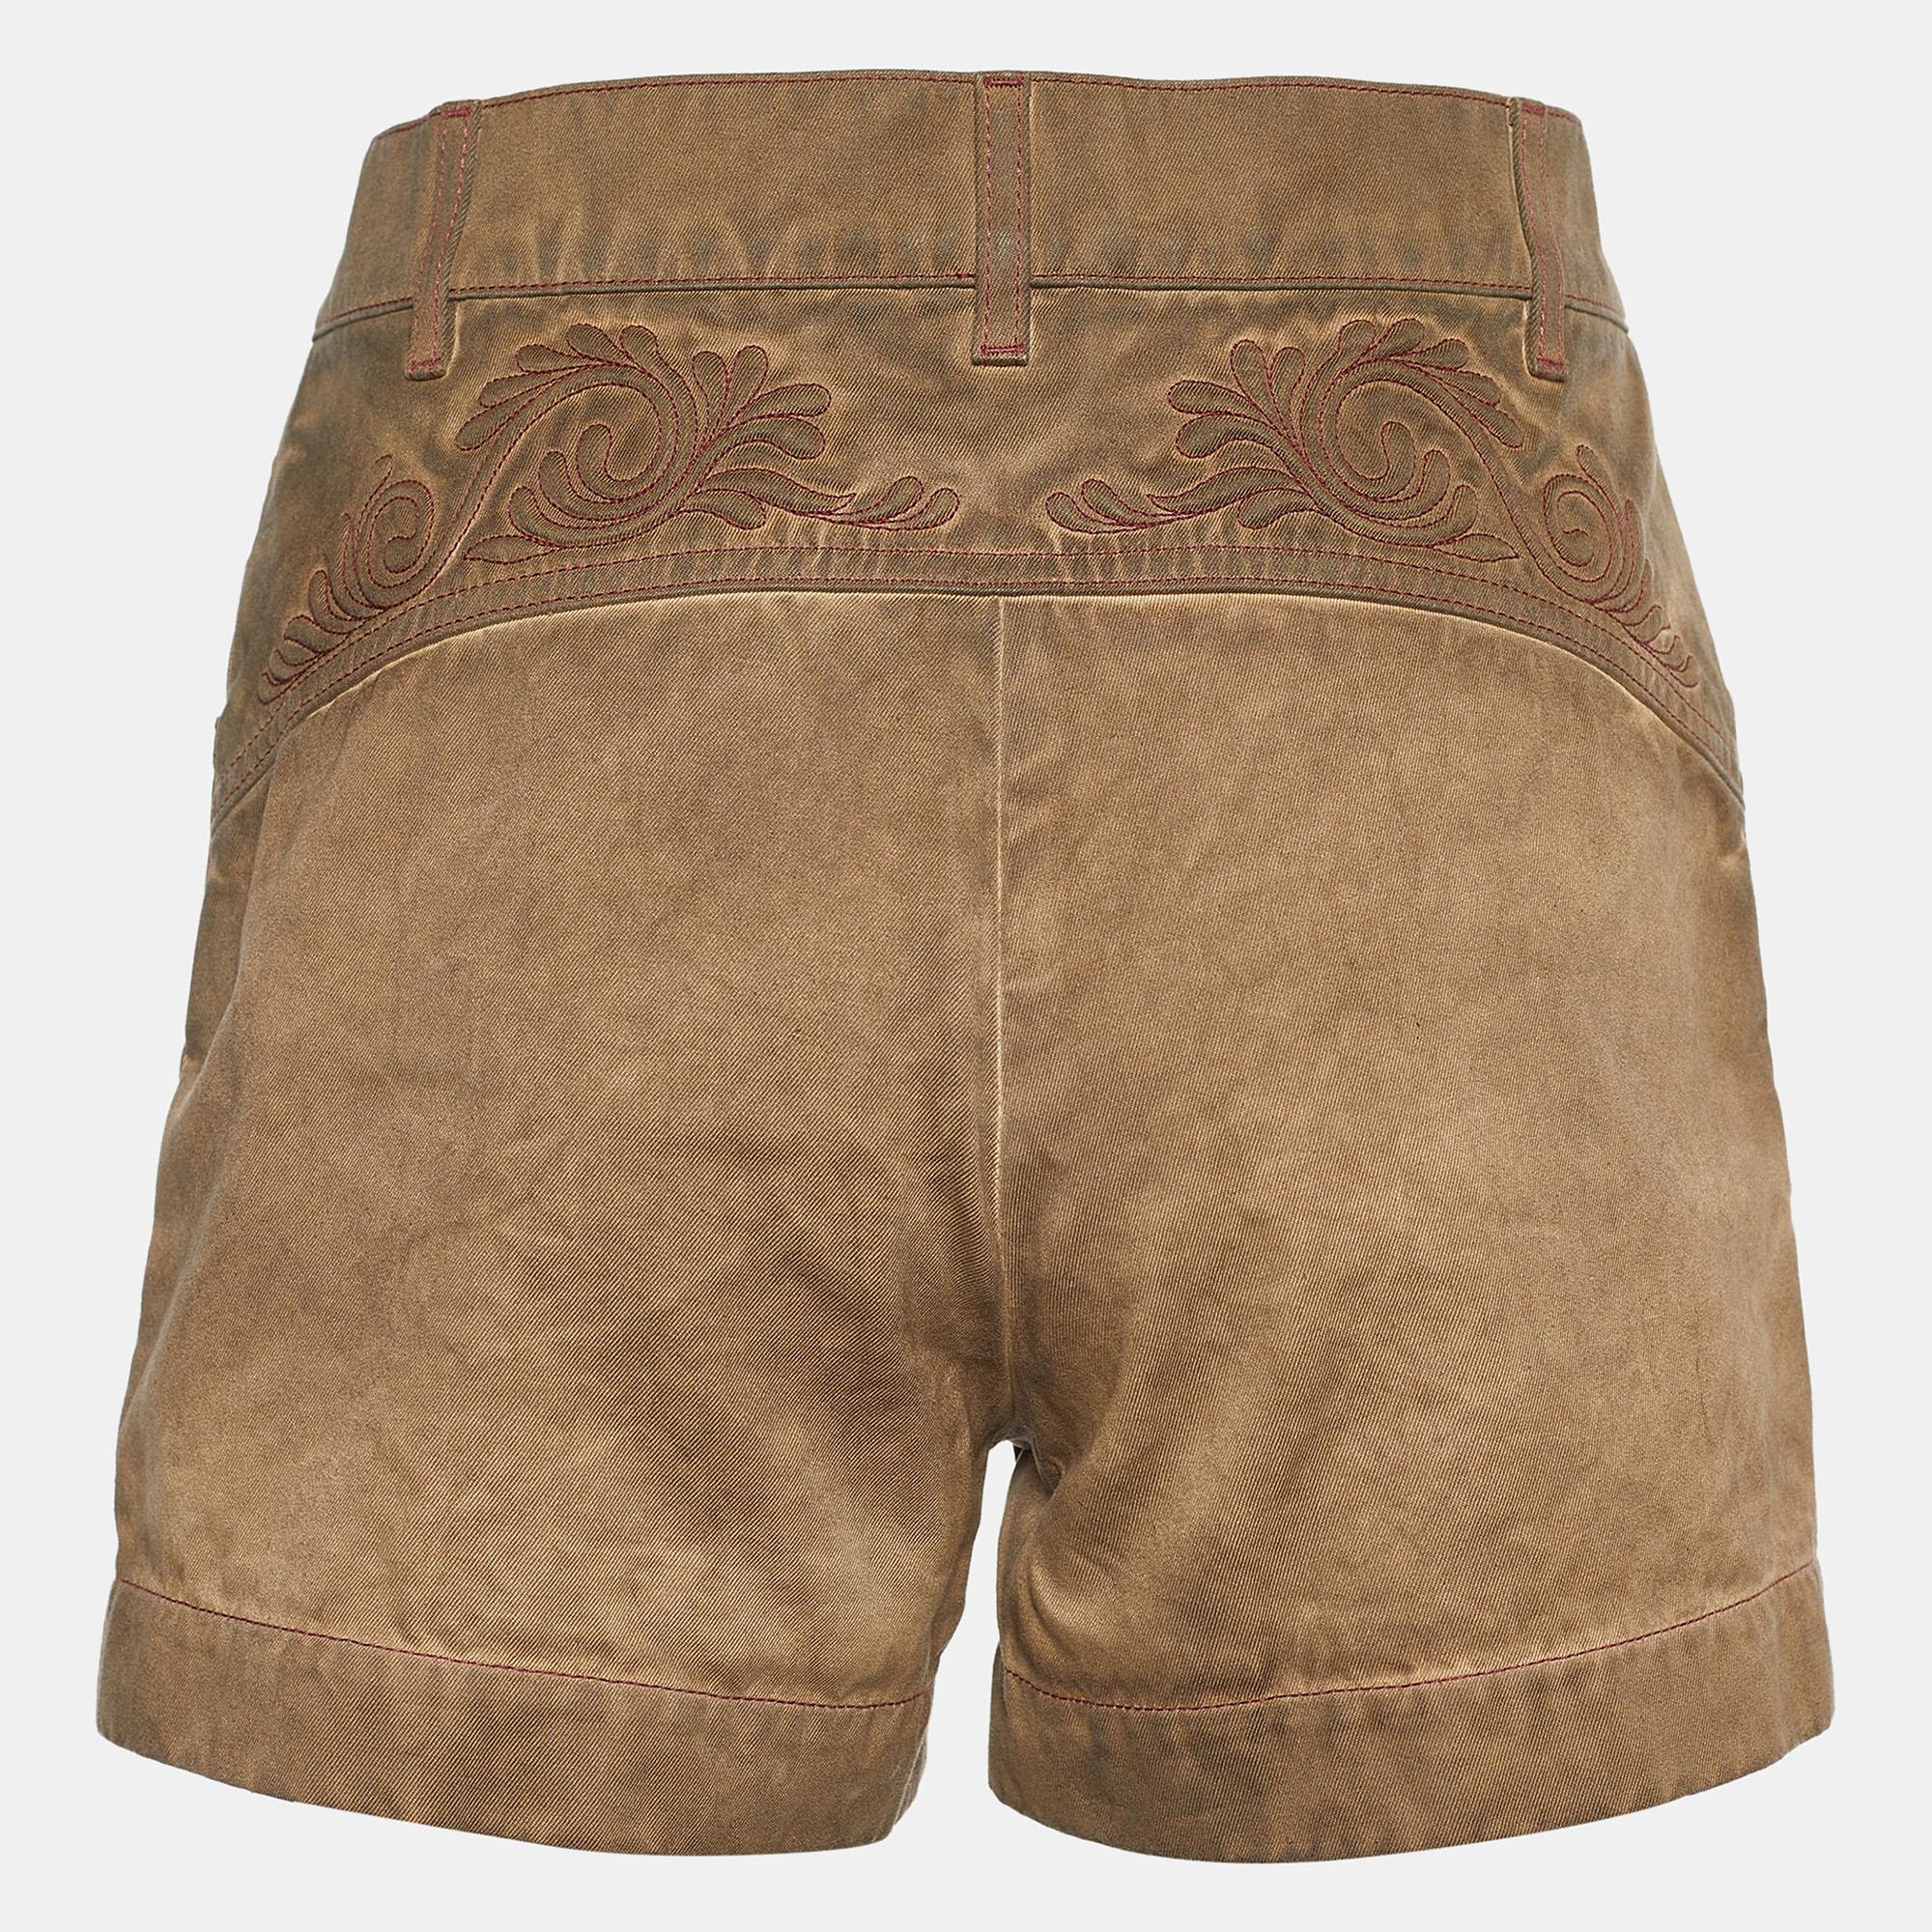 These shorts from the House of Chanel are a closet essential. They are tailored from brown cotton twill fabric and showcase embroidery and overdyed detailing. They feature a buttoned closure and two external pockets. These Chanel shorts are great